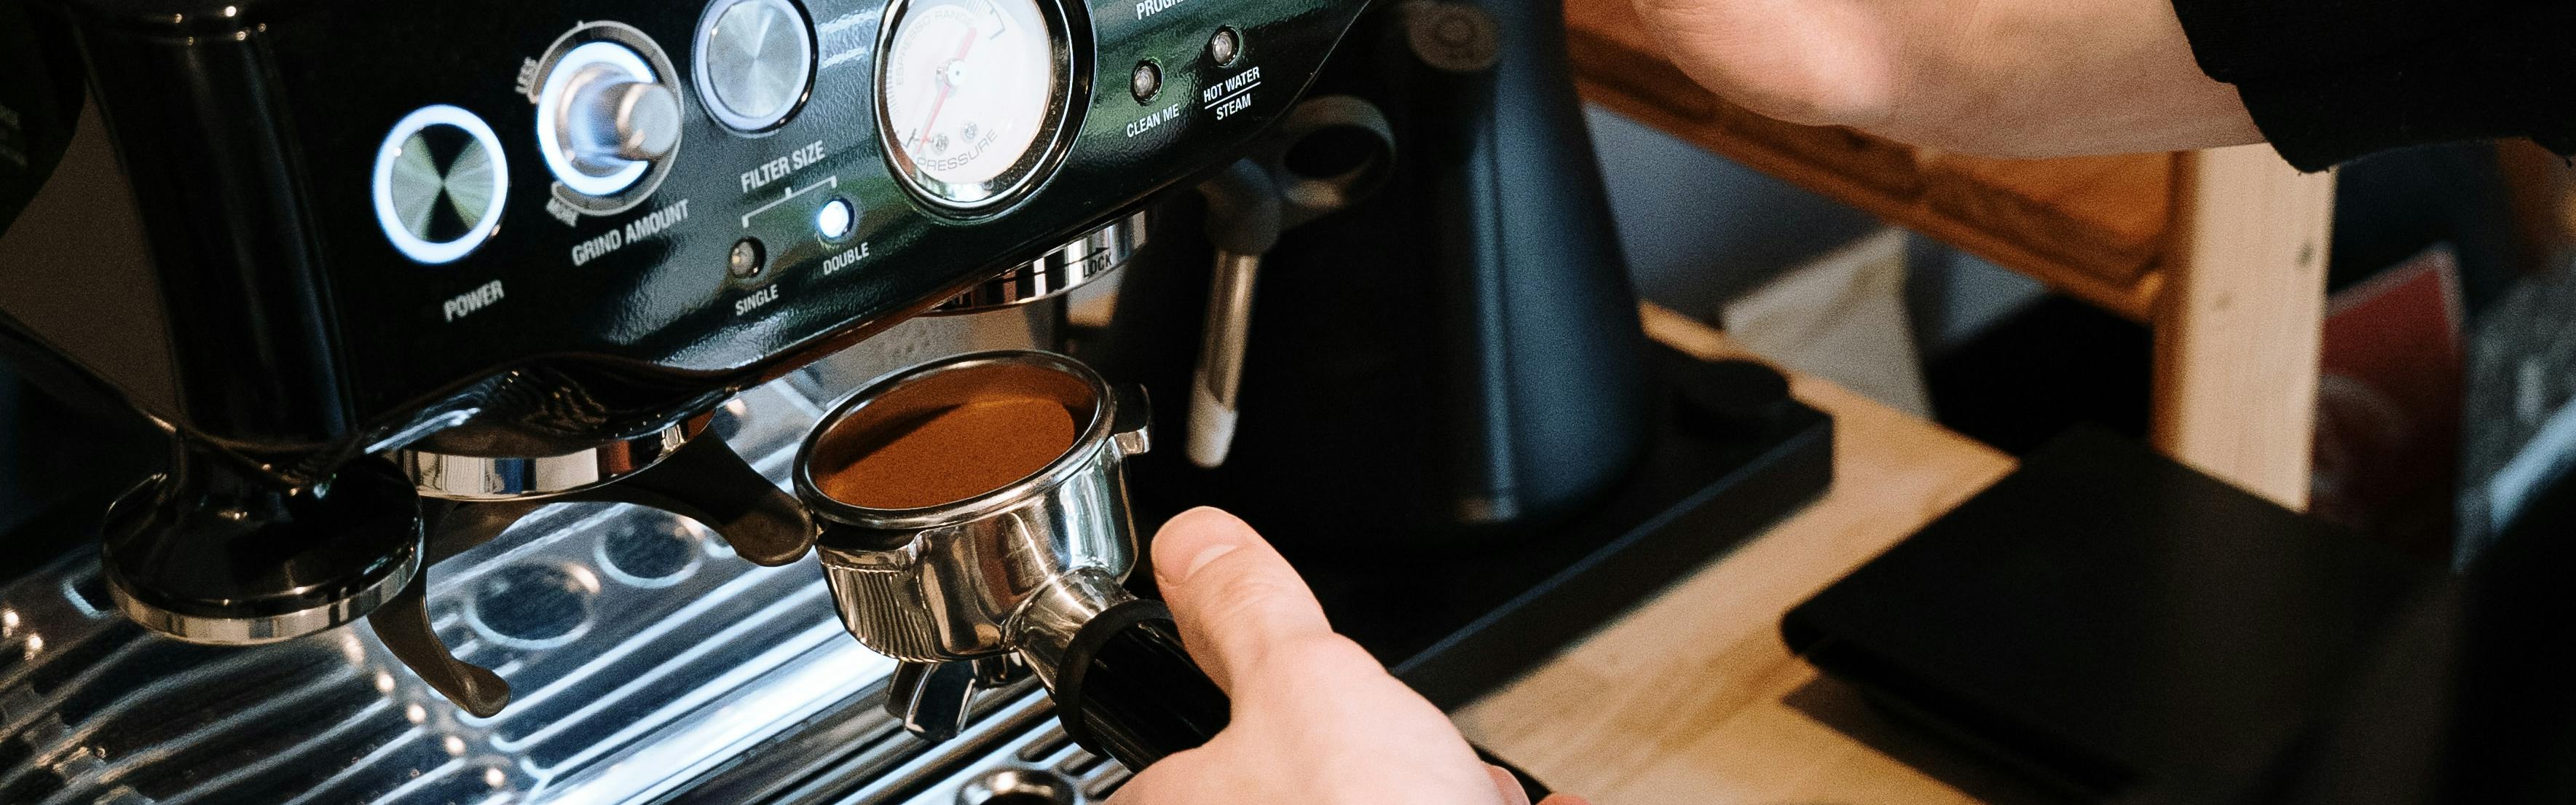 14 Essential Accessories for Making Espresso at Home